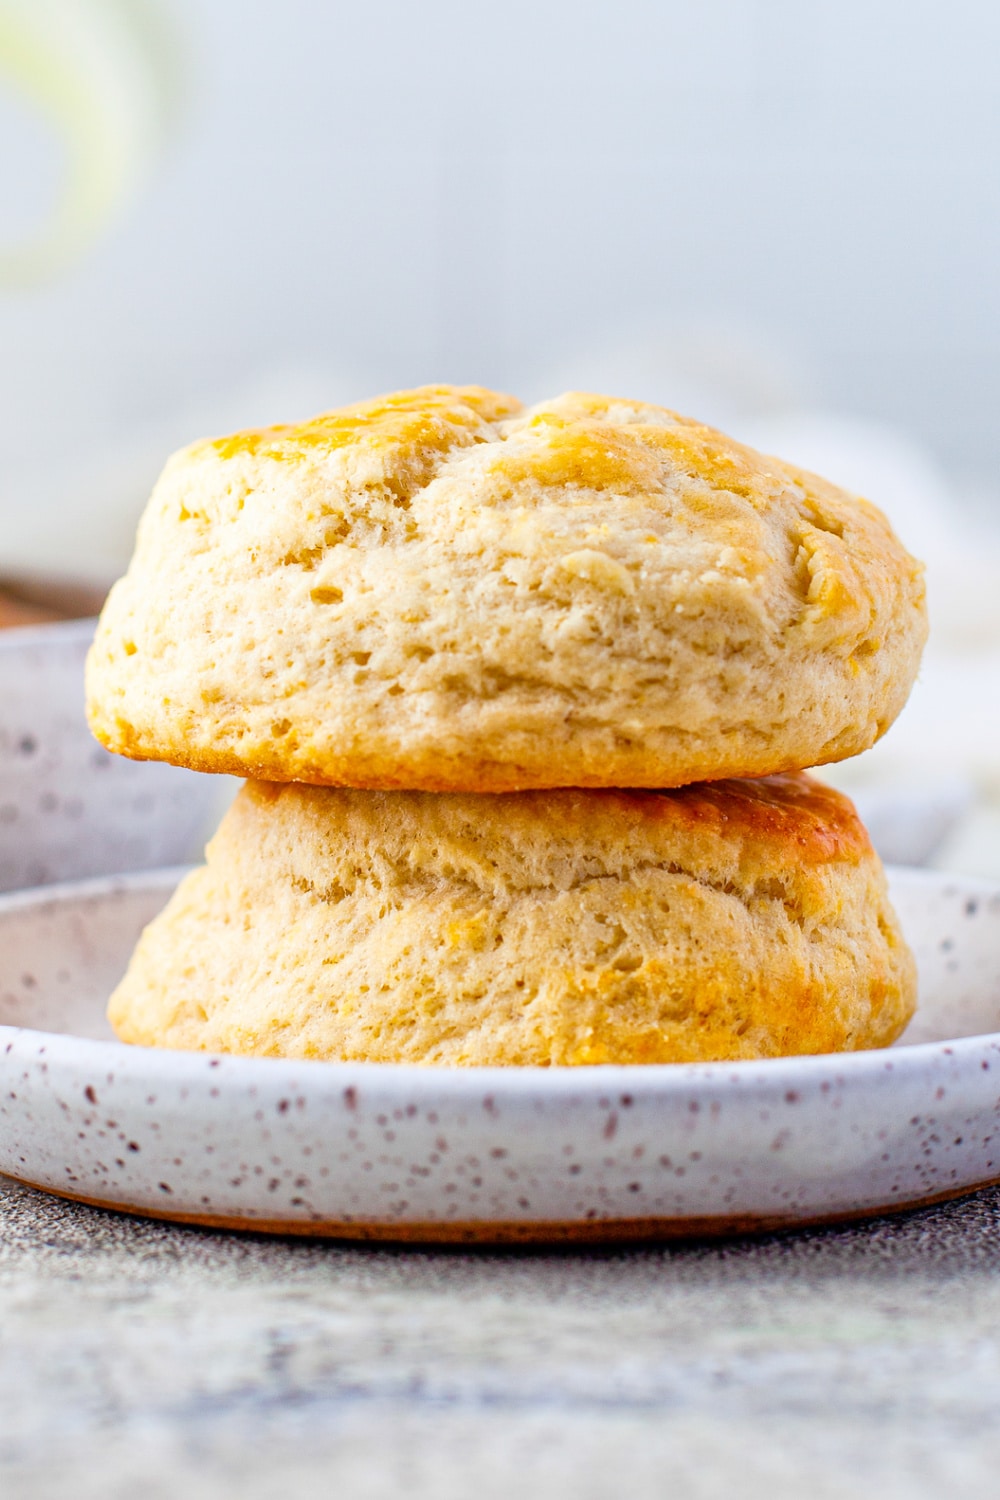 Two Buttermilk Biscuits stacked together on a white plate.